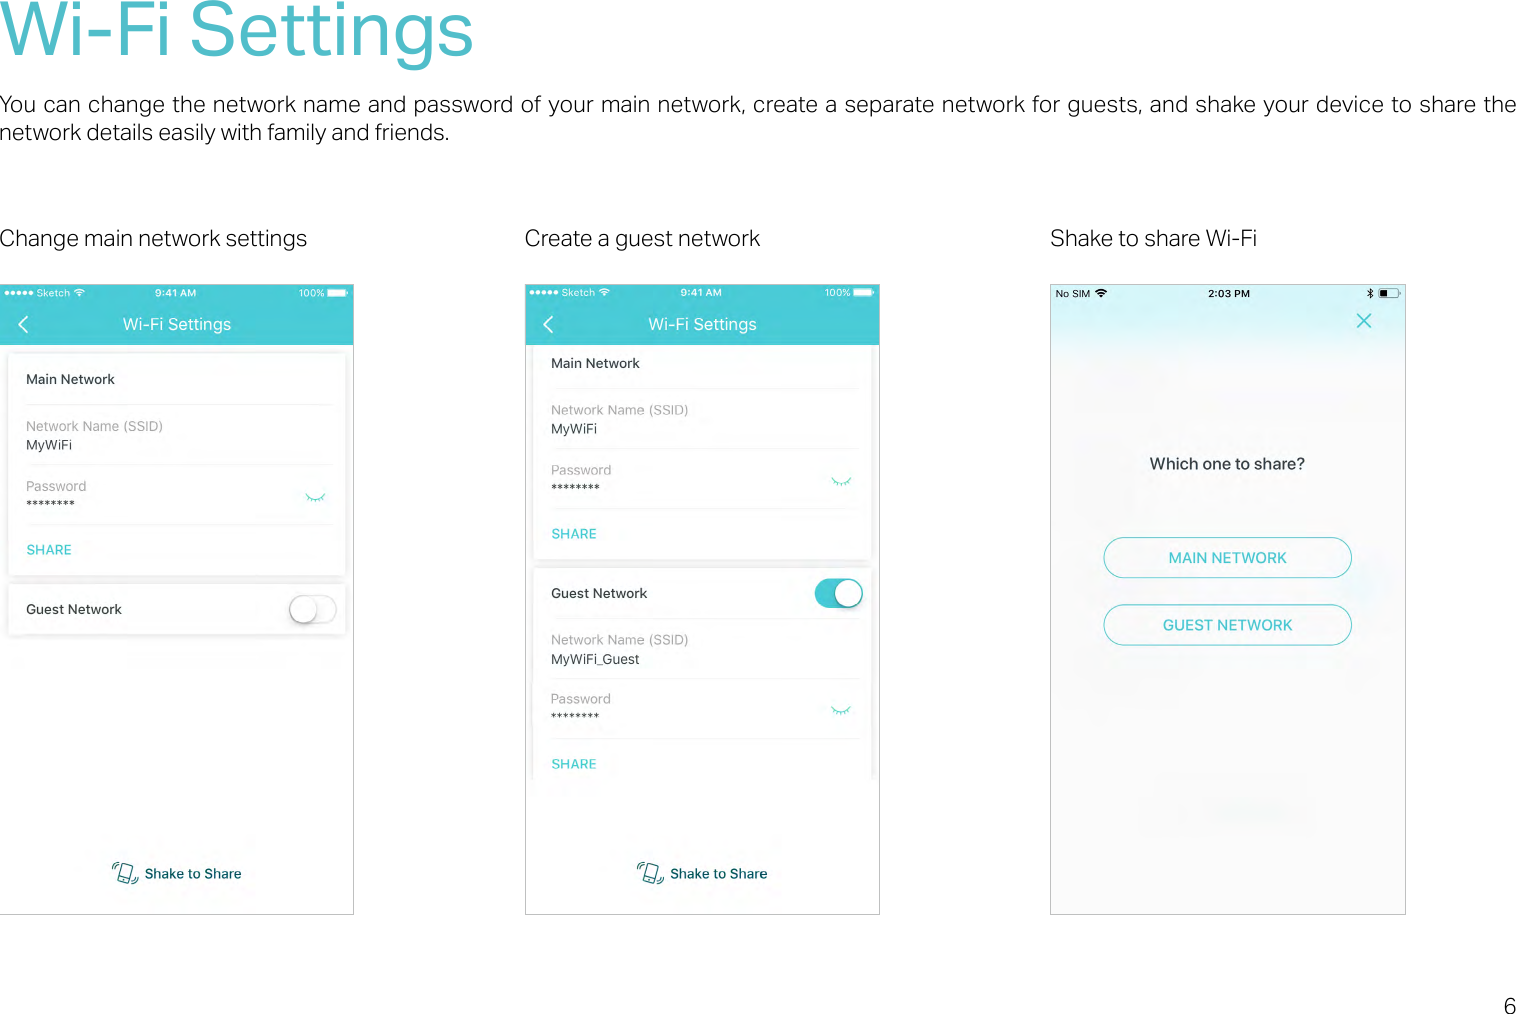 6Wi-Fi SettingsYou can change the network name and password of your main network, create a separate network for guests, and shake your device to share the network details easily with family and friends. Change main network settings Create a guest network Shake to share Wi-Fi